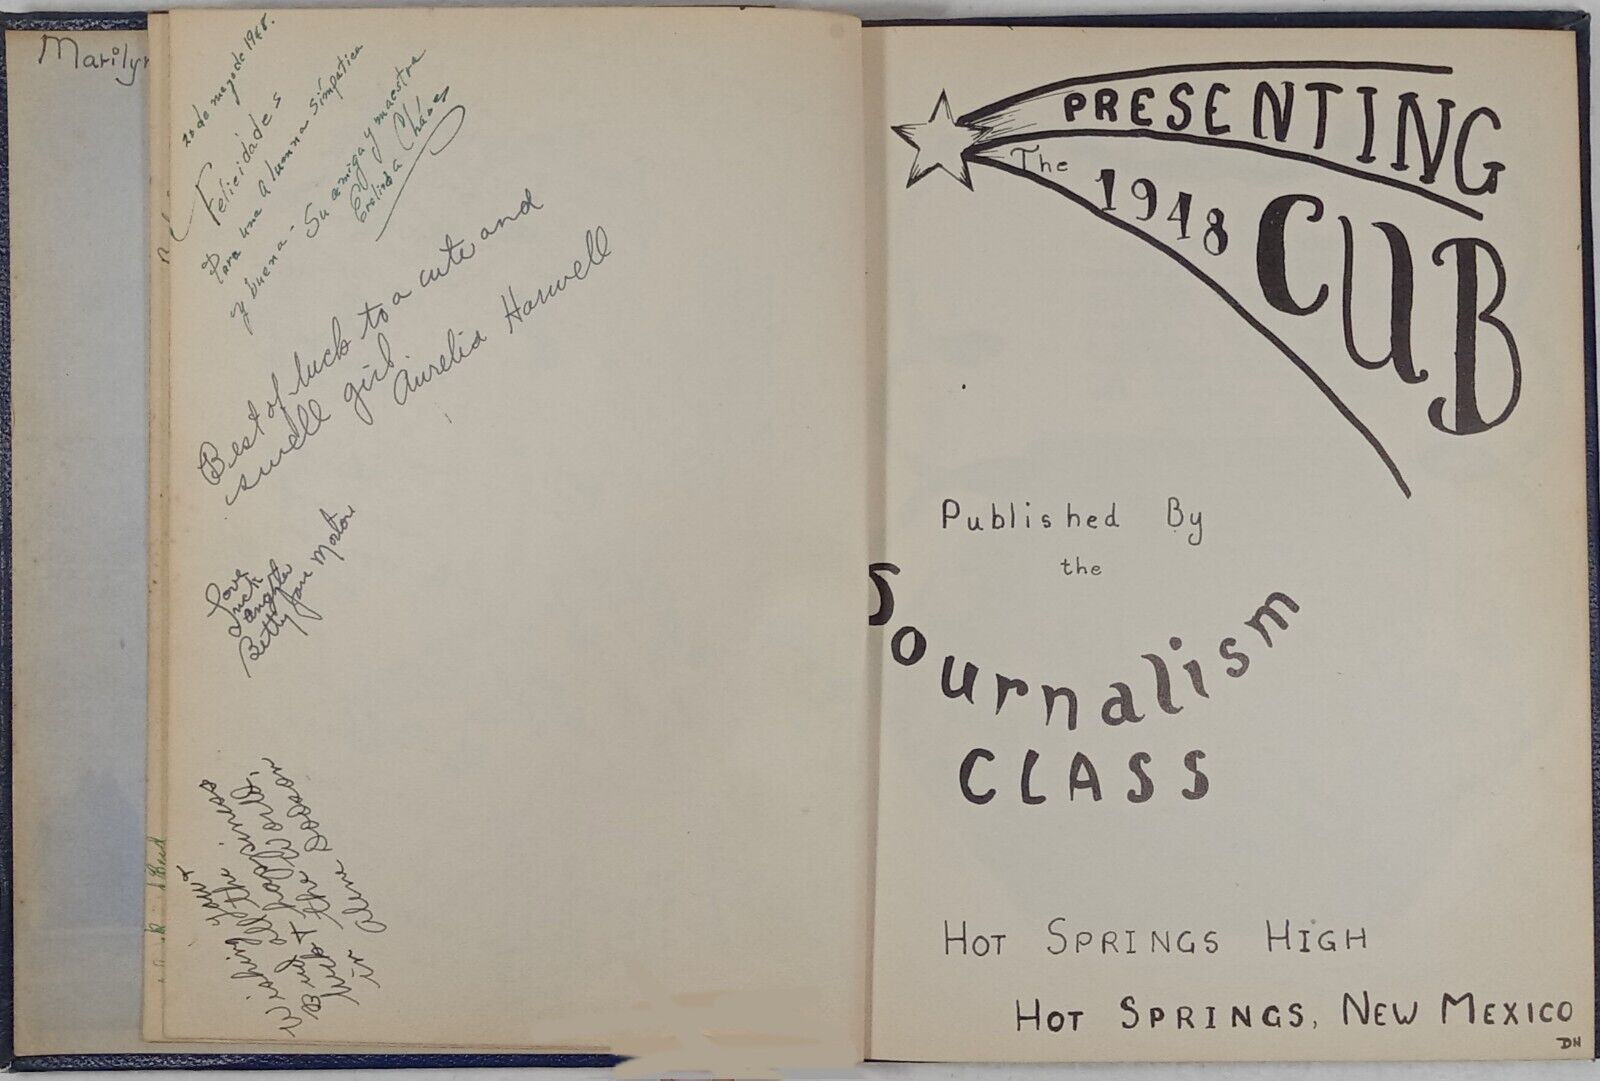 The Cub New Mexico Hot Springs High School Year Book 1948 Written In 